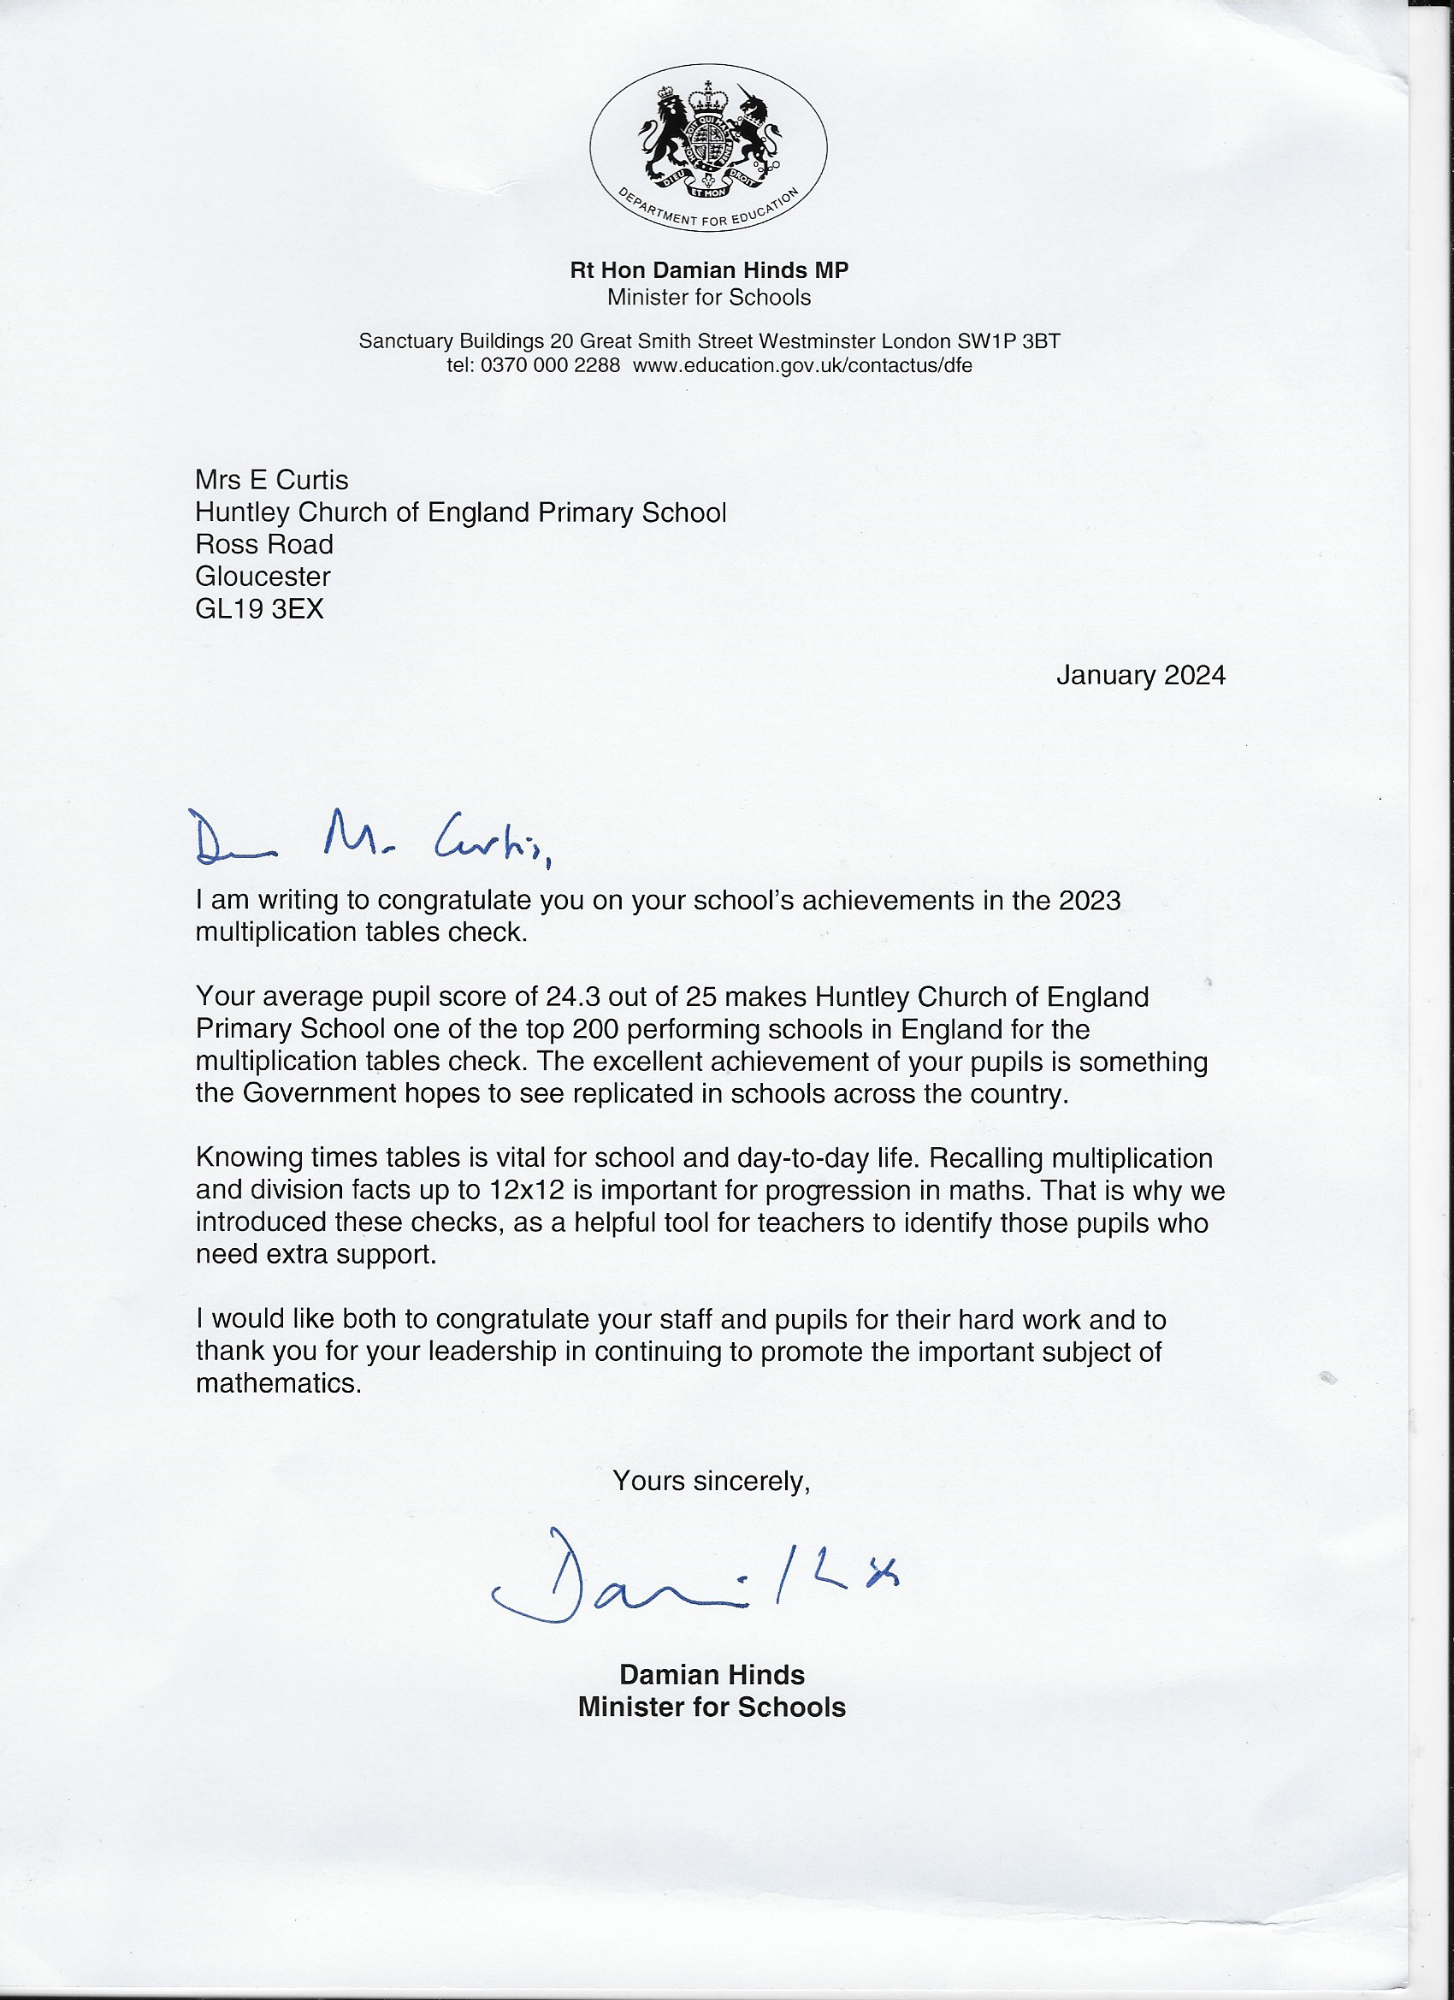 Damian Hinds Letter